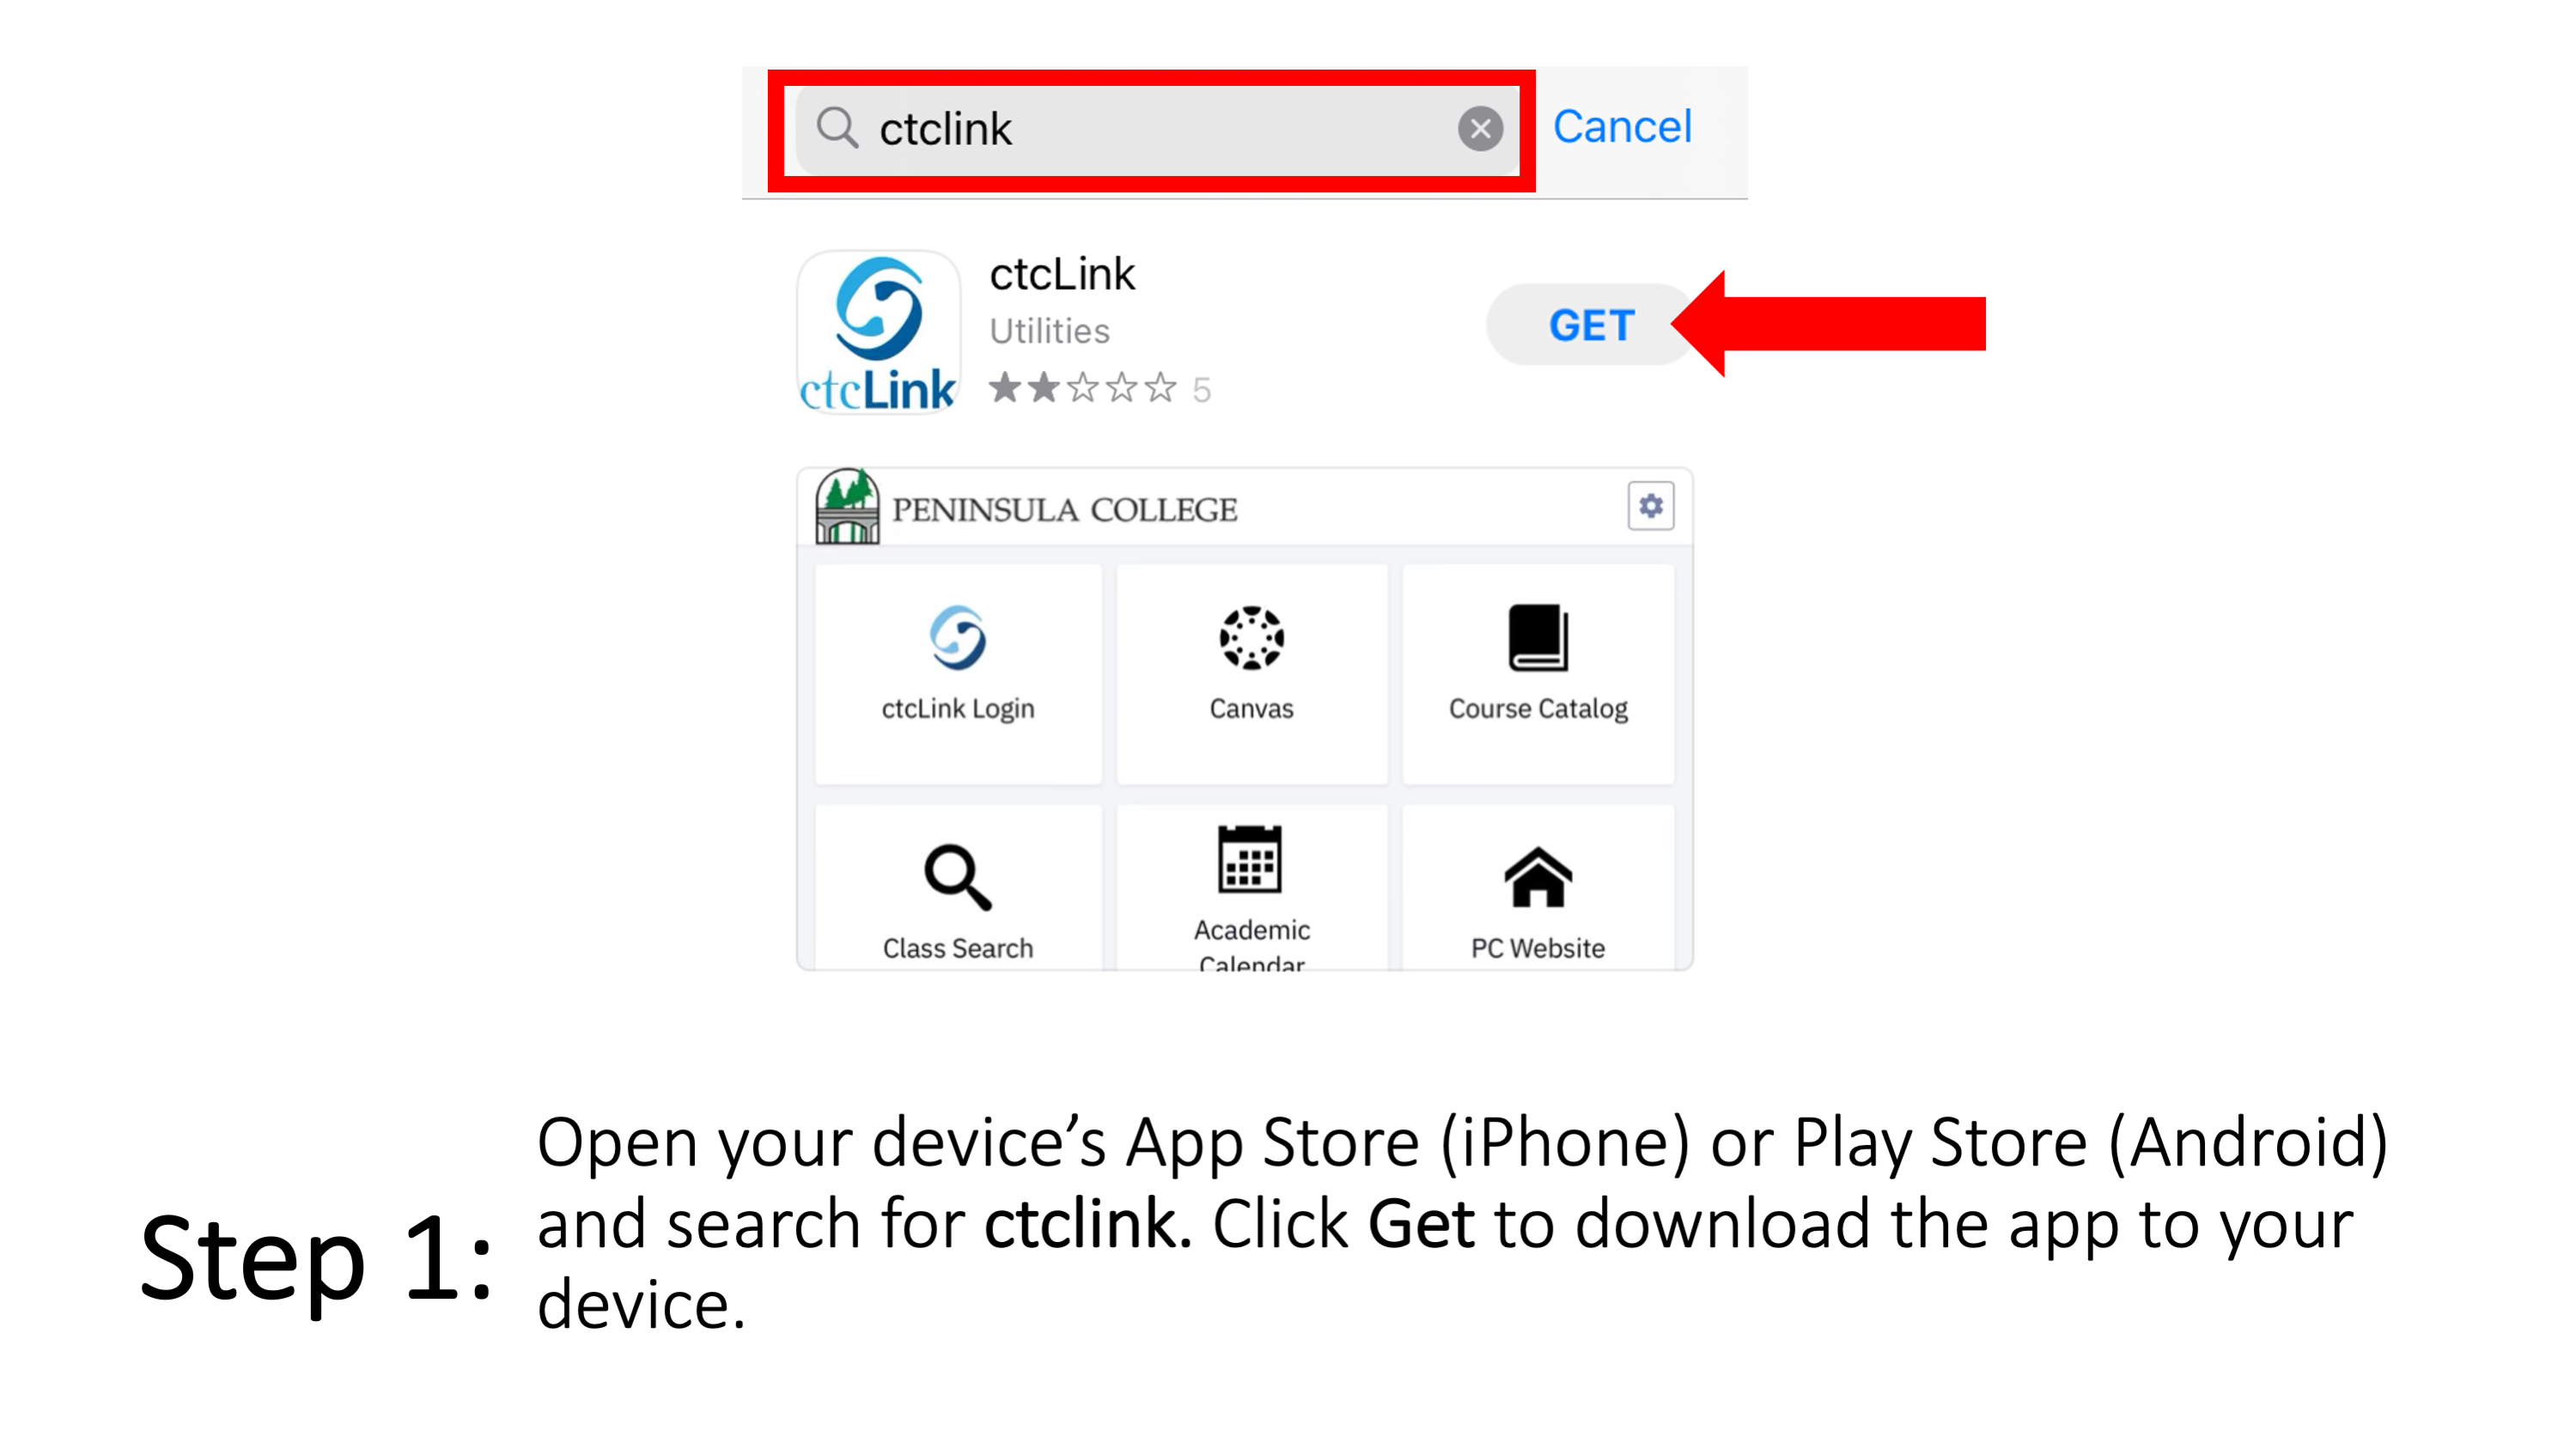 Open your device’s App Store (iPhone) or Play Store (Android) an search for ctcLink. Click Get to download the app to your device.